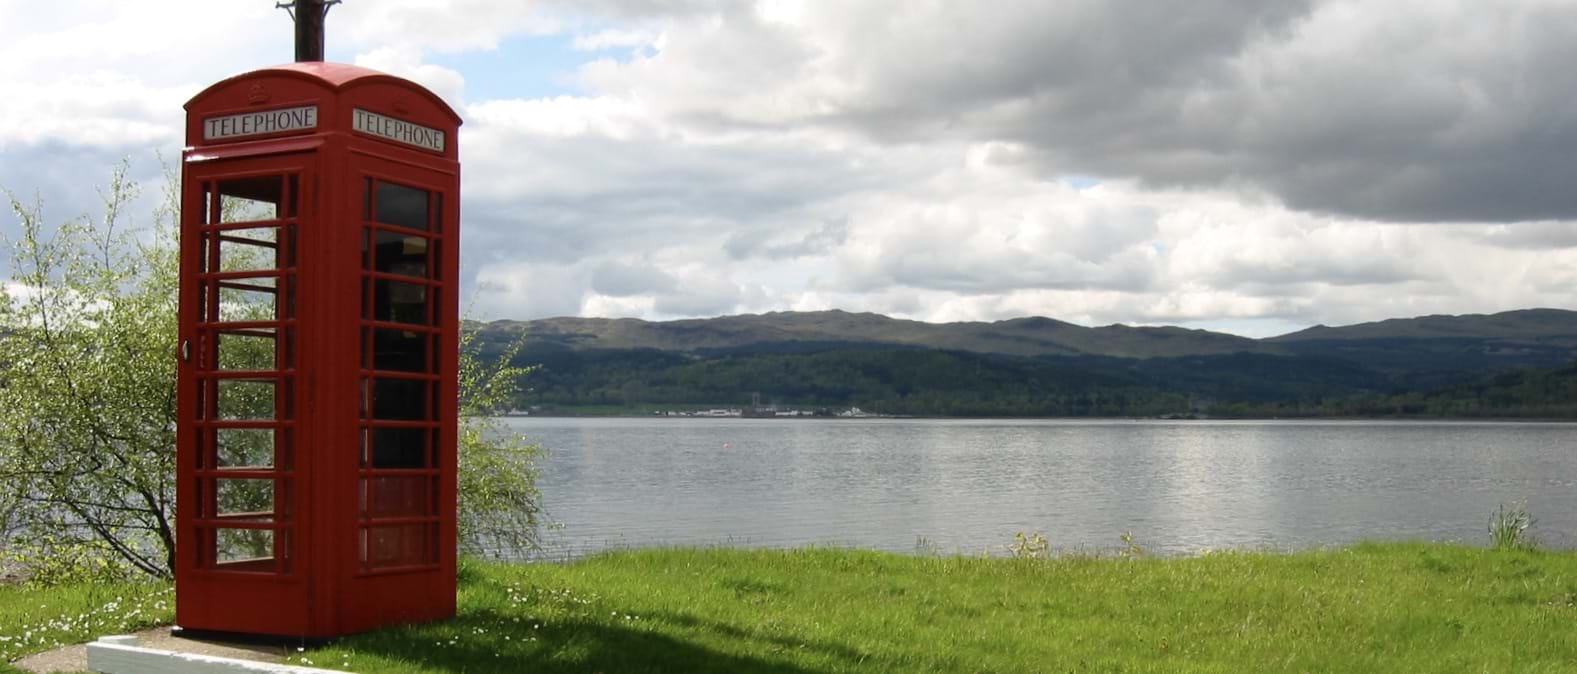 Red telephone booth on grassy hill next to a lake